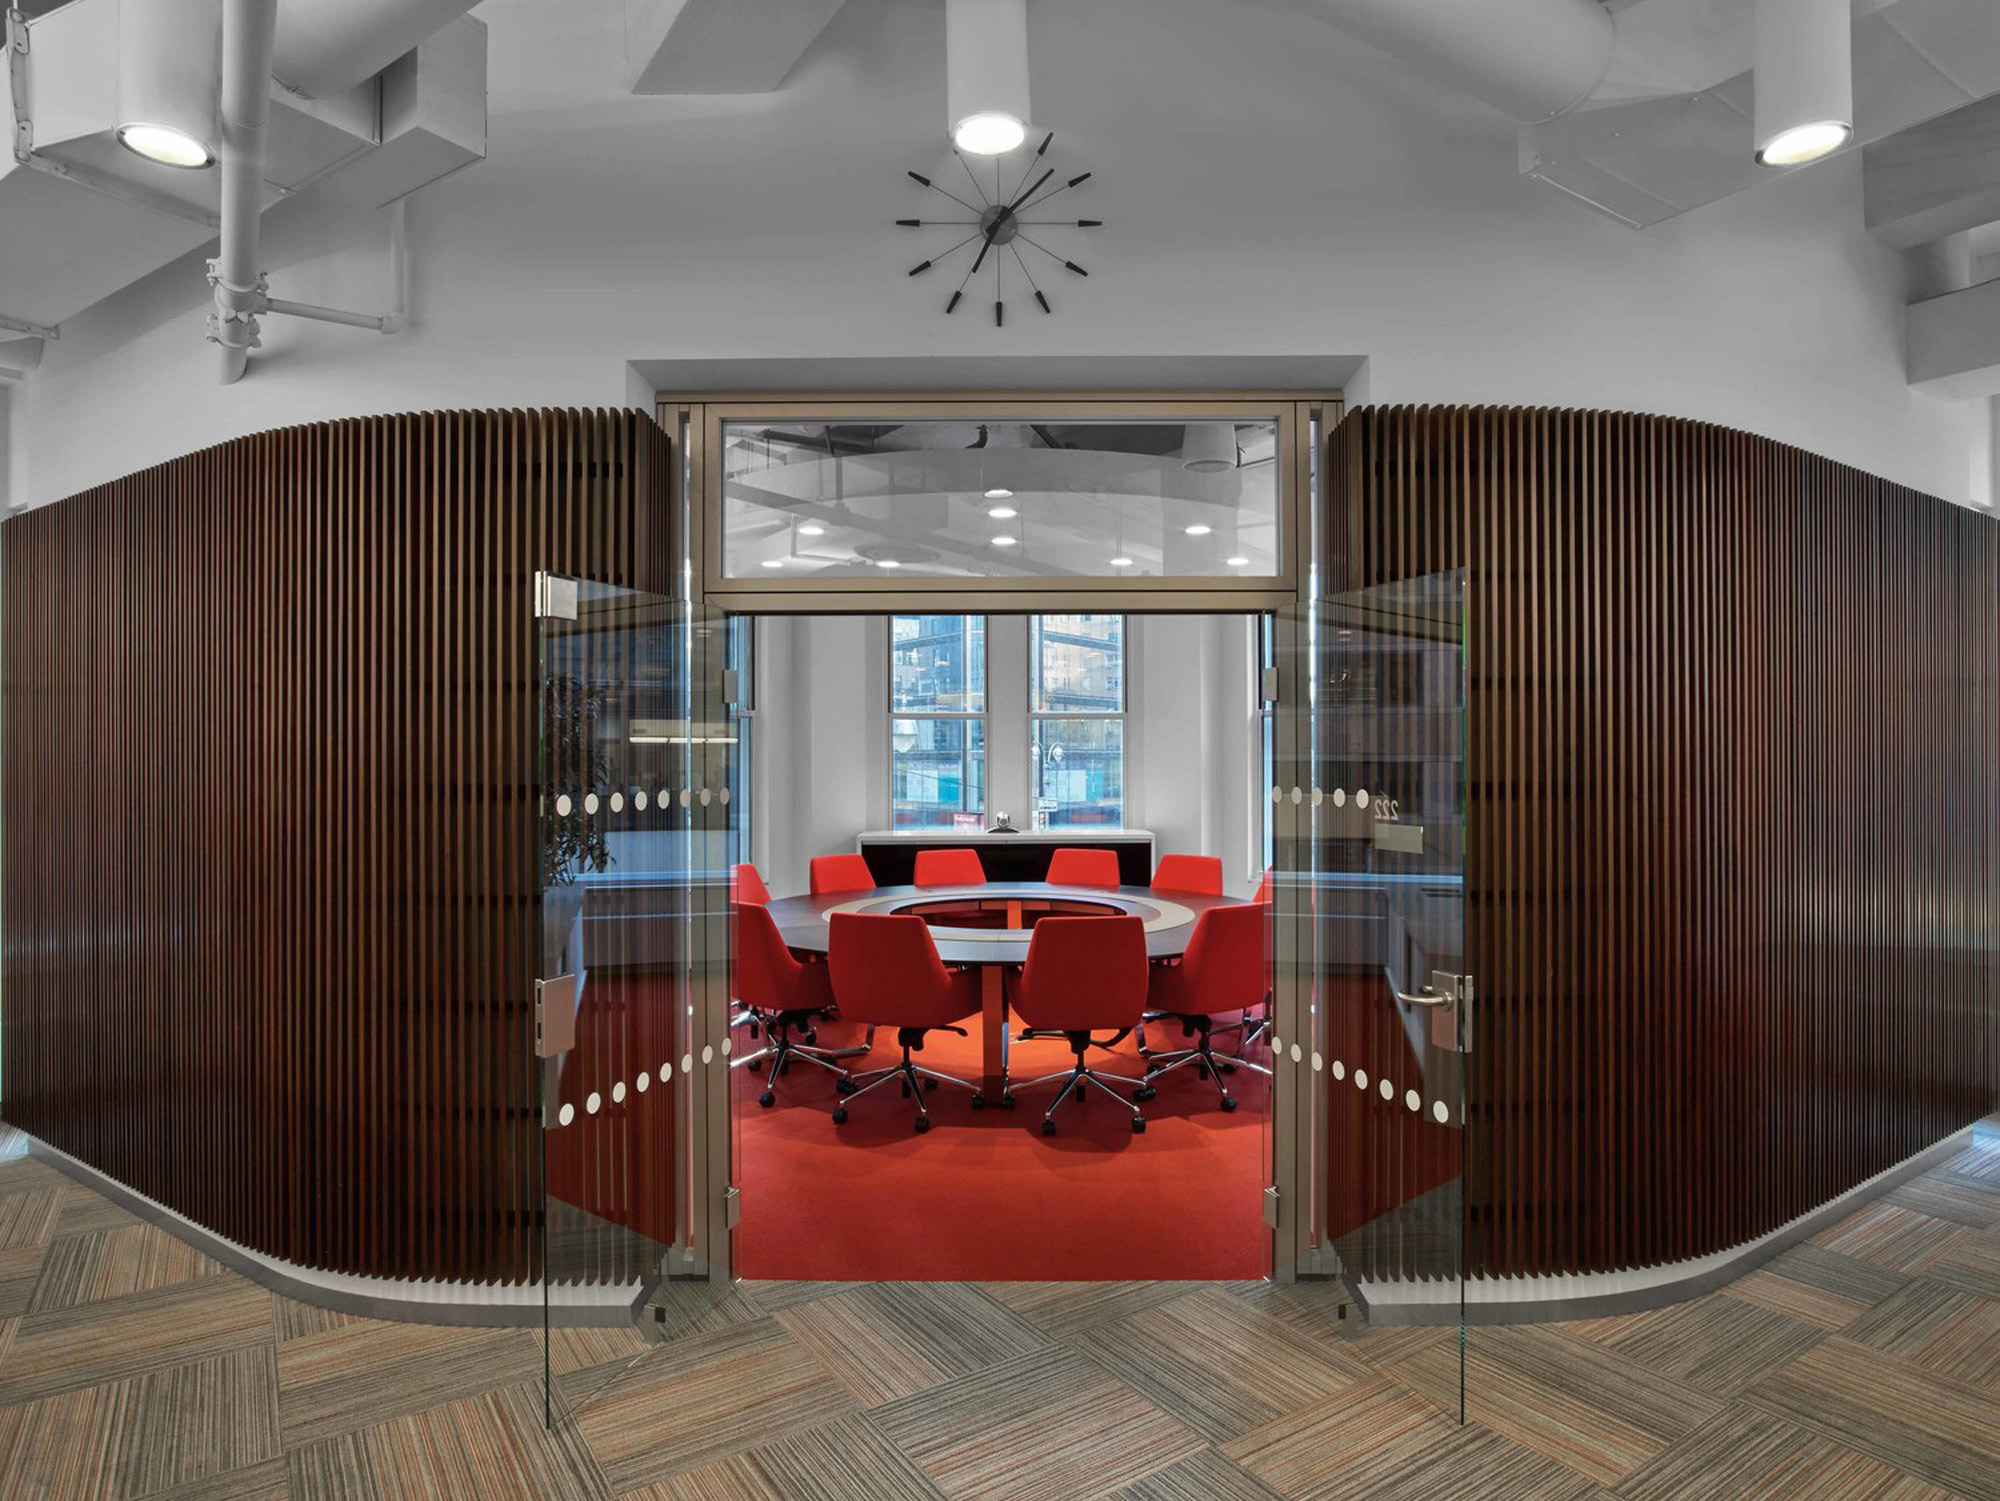 Modern office conference room with curved wooden slat partitions, red chairs around a circular table, and a herringbone-pattern floor complementing the neutral color palette. Clear glass doors offer a glimpse into the collaborative space, while a starburst ceiling light fixture adds a mid-century touch.